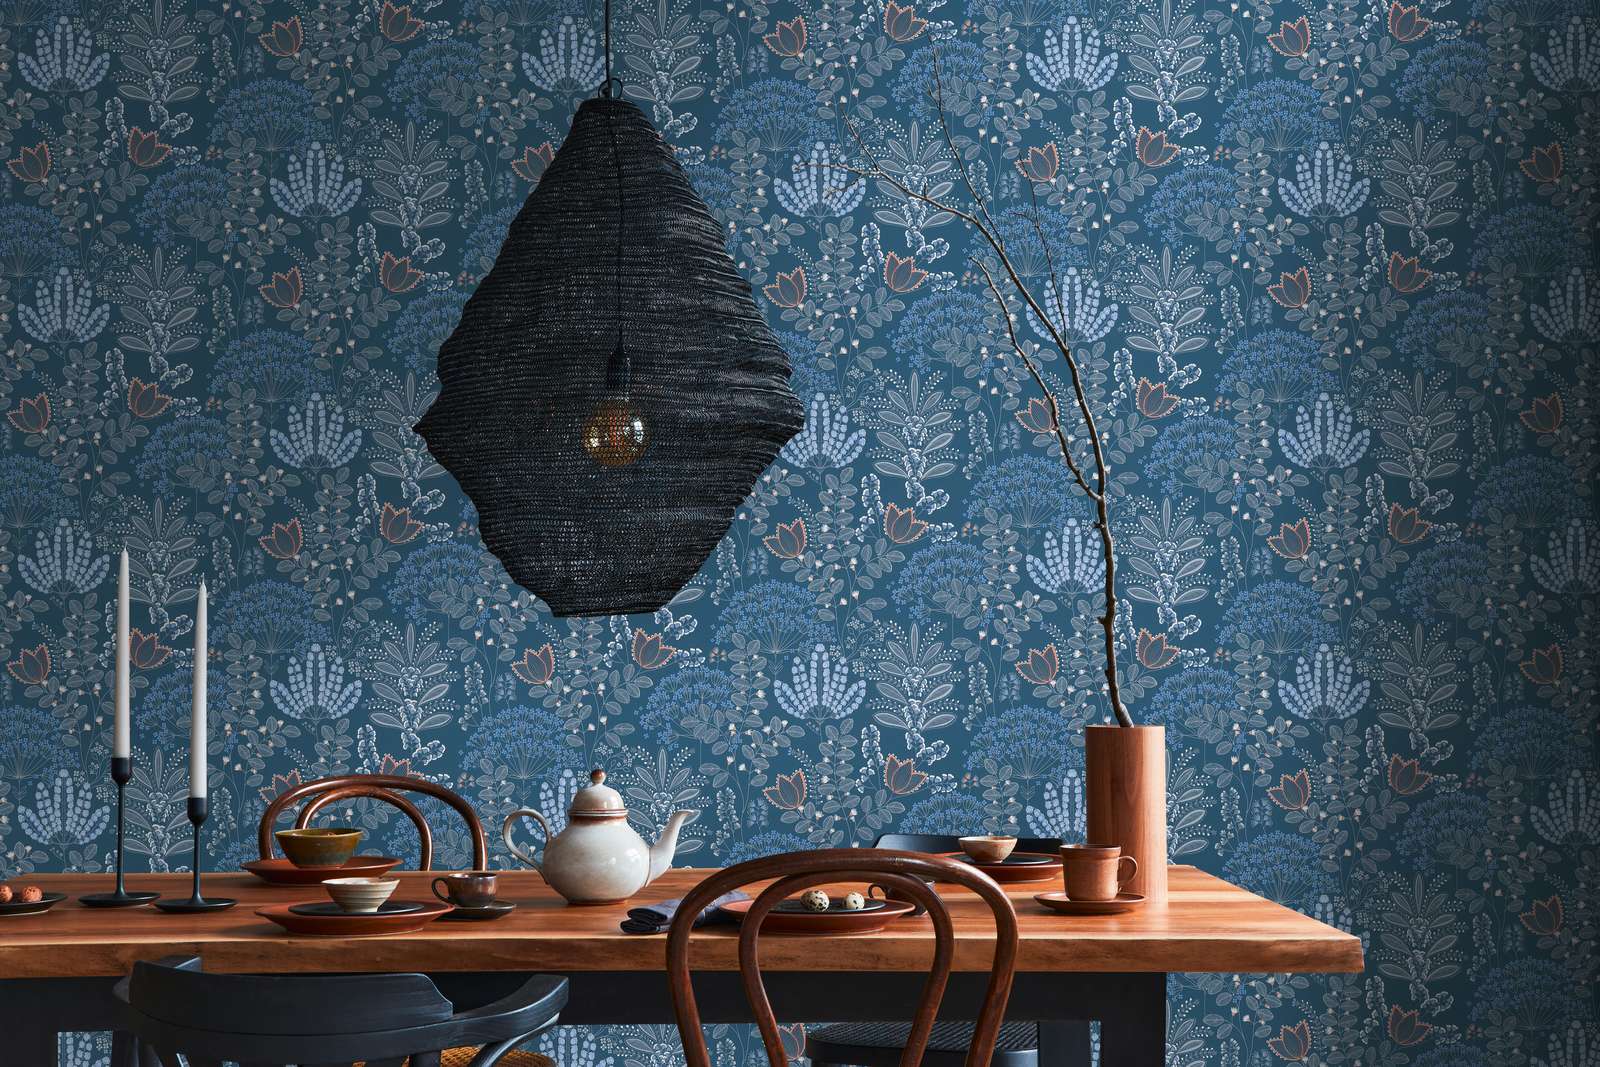             Non-woven wallpaper floral with leaves in retro look light textured, matt - blue, white, grey
        